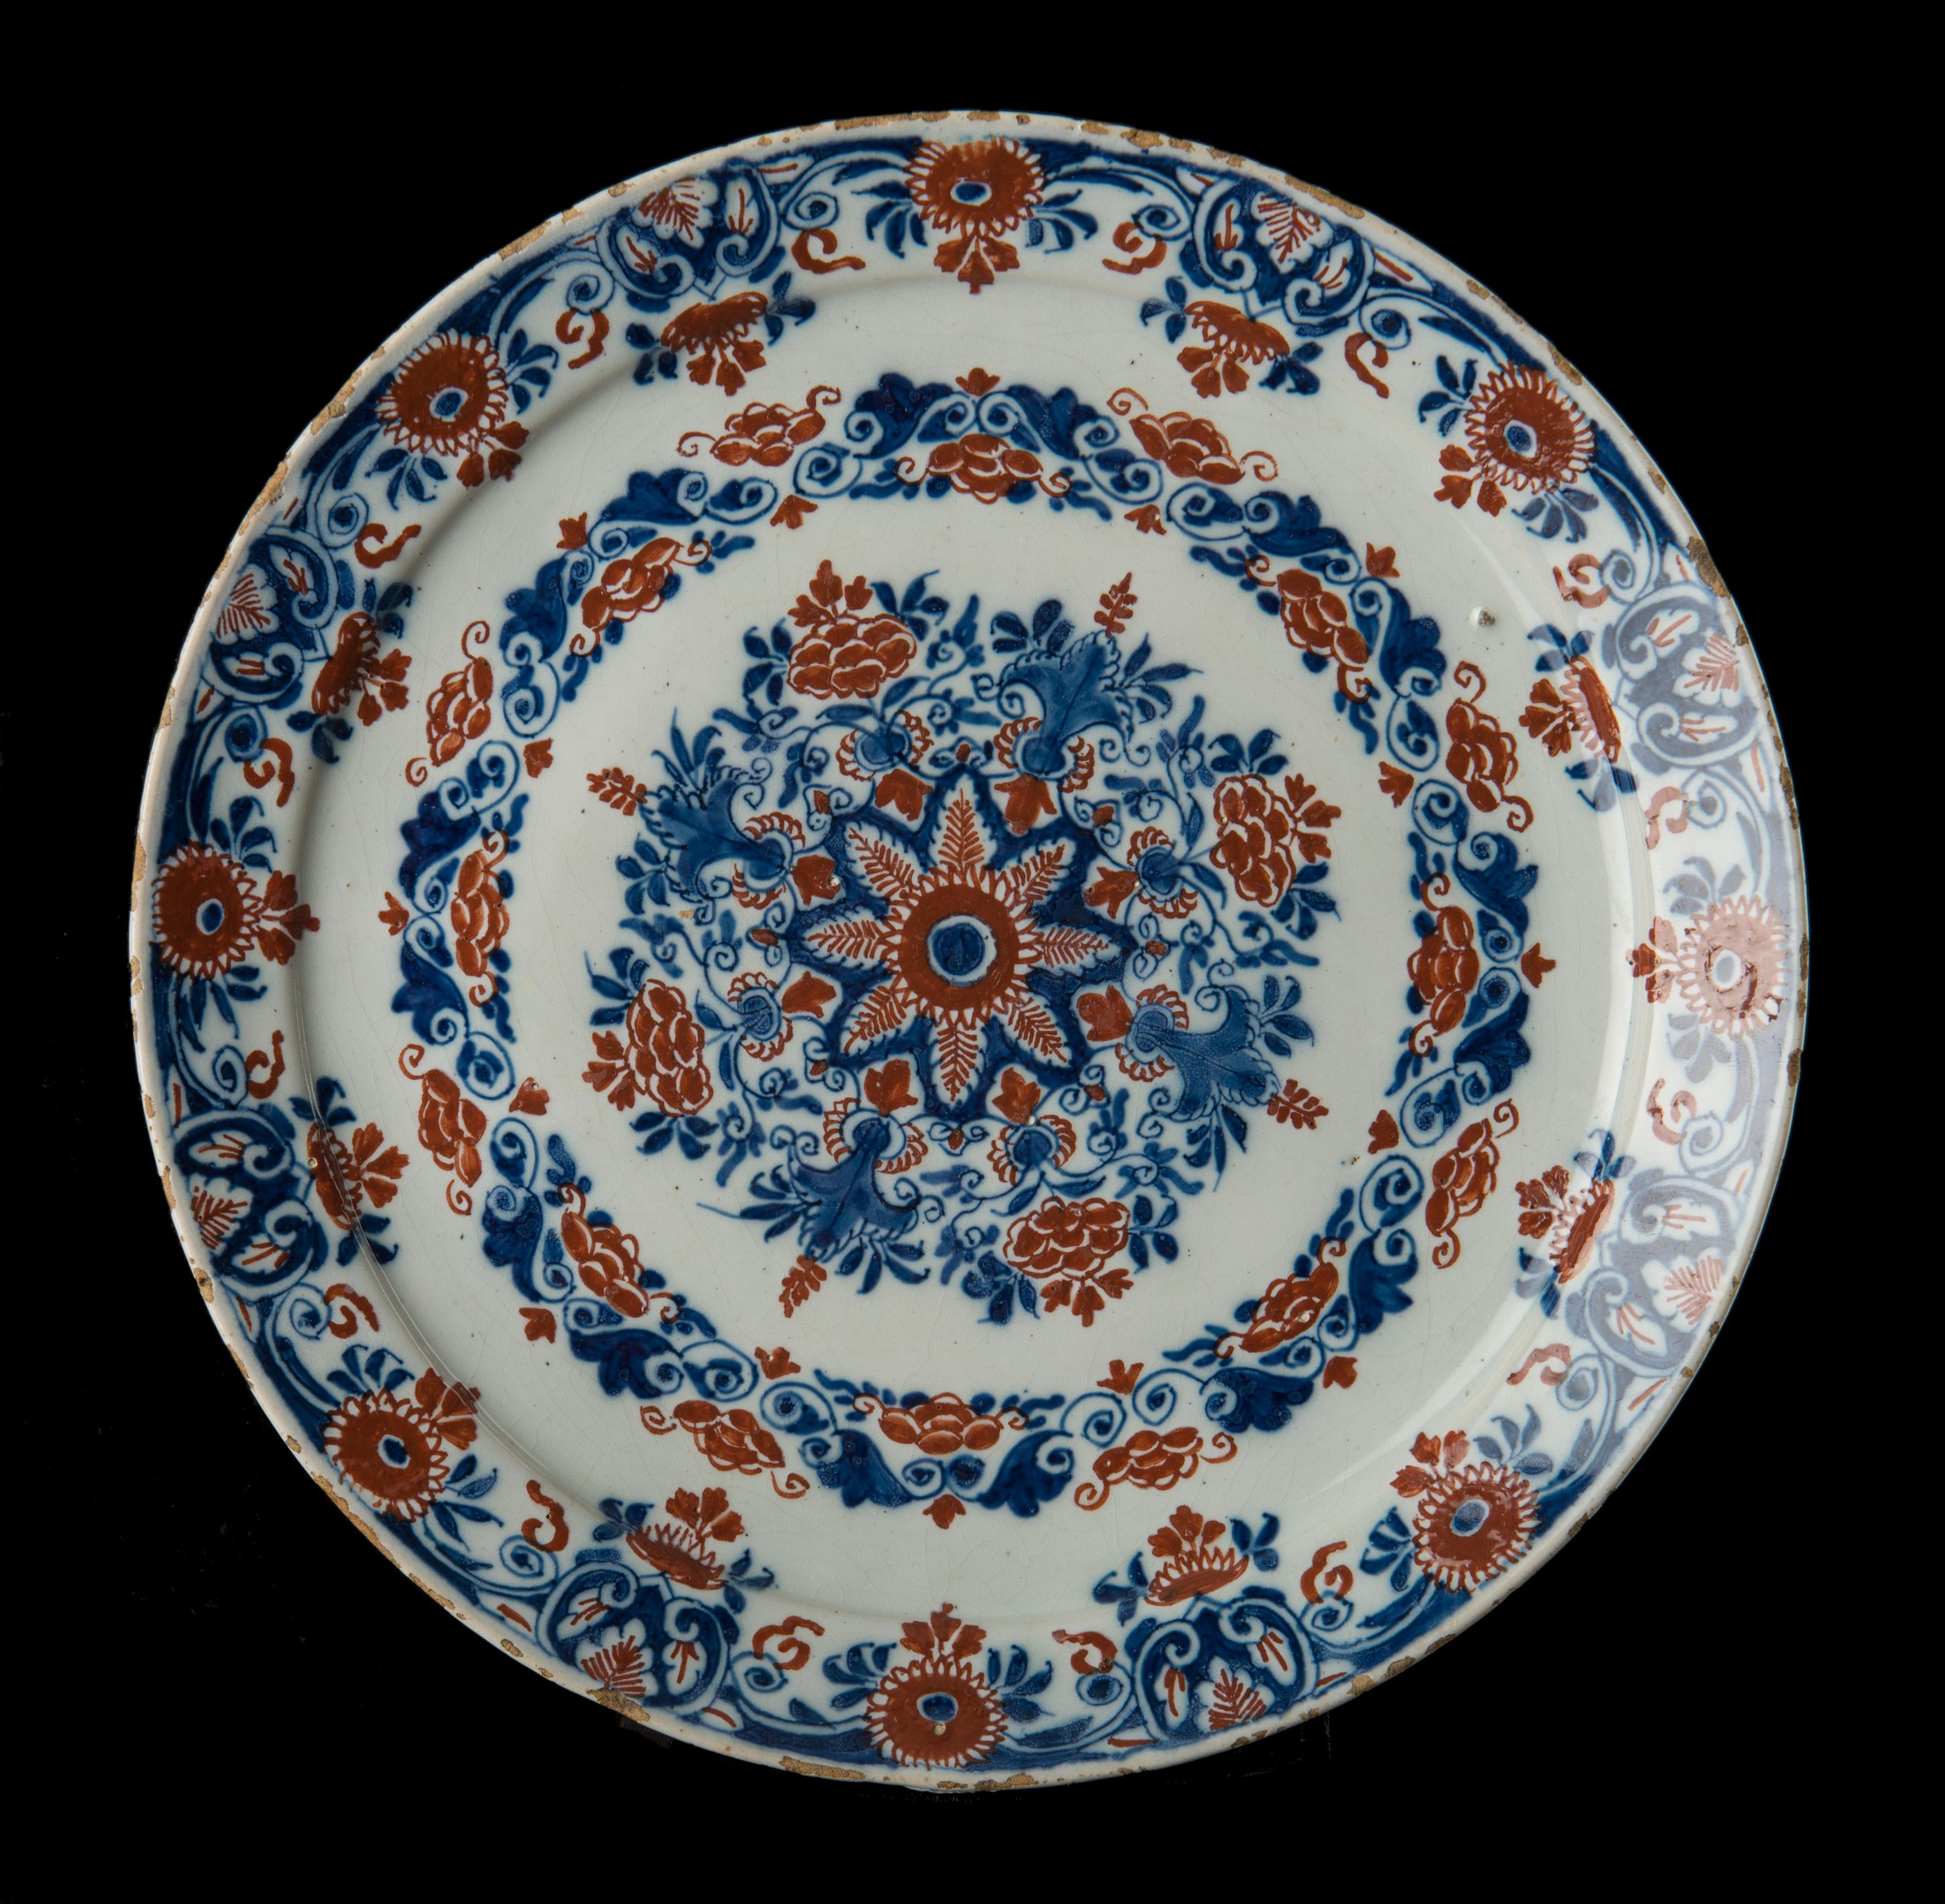 Cashmere plate. Delft, 1701-1722. The Greek A pottery. 
Mark: APK, period of Pieter Kocx (1701-1703) or his widow Johanna van der Heul (1703-1722) 

The Plate is painted with a floral decor in blue and red, the so-called cashmere palette. A